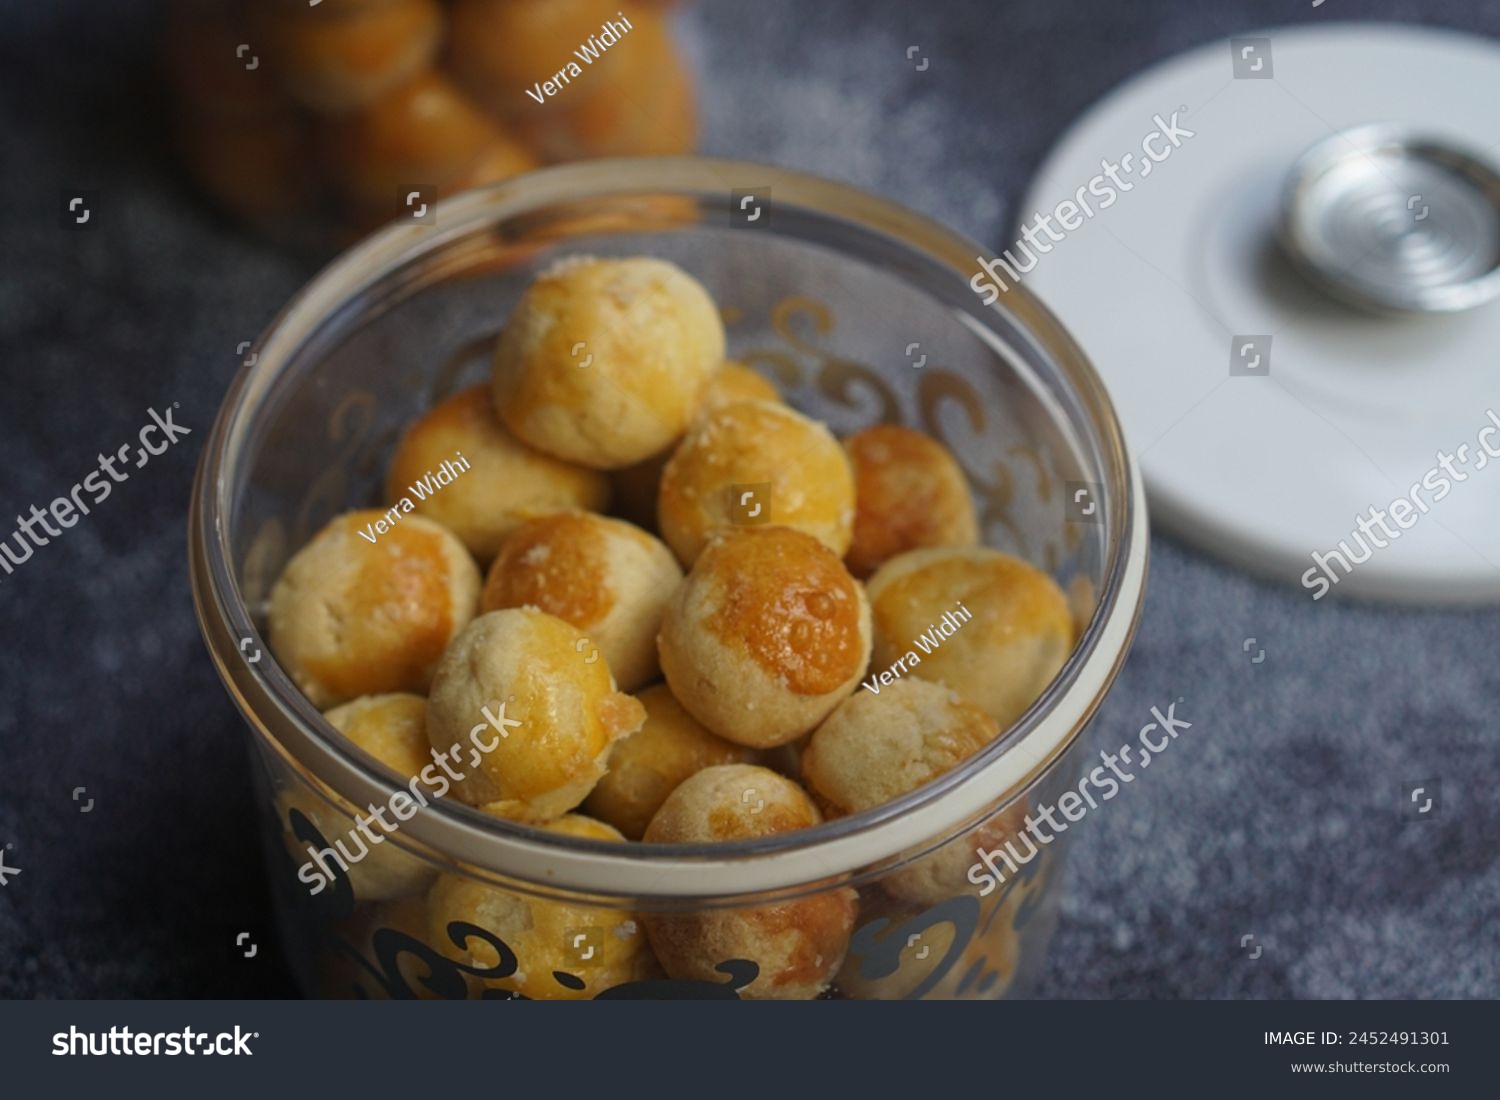 Nastar Cookies, Pineapple tarts or nanas tart are small, bite-size pastries filled or topped with pineapple jam, commonly found when Hari Raya or Eid Al Fitr or Lebaran. Selective focus. #2452491301